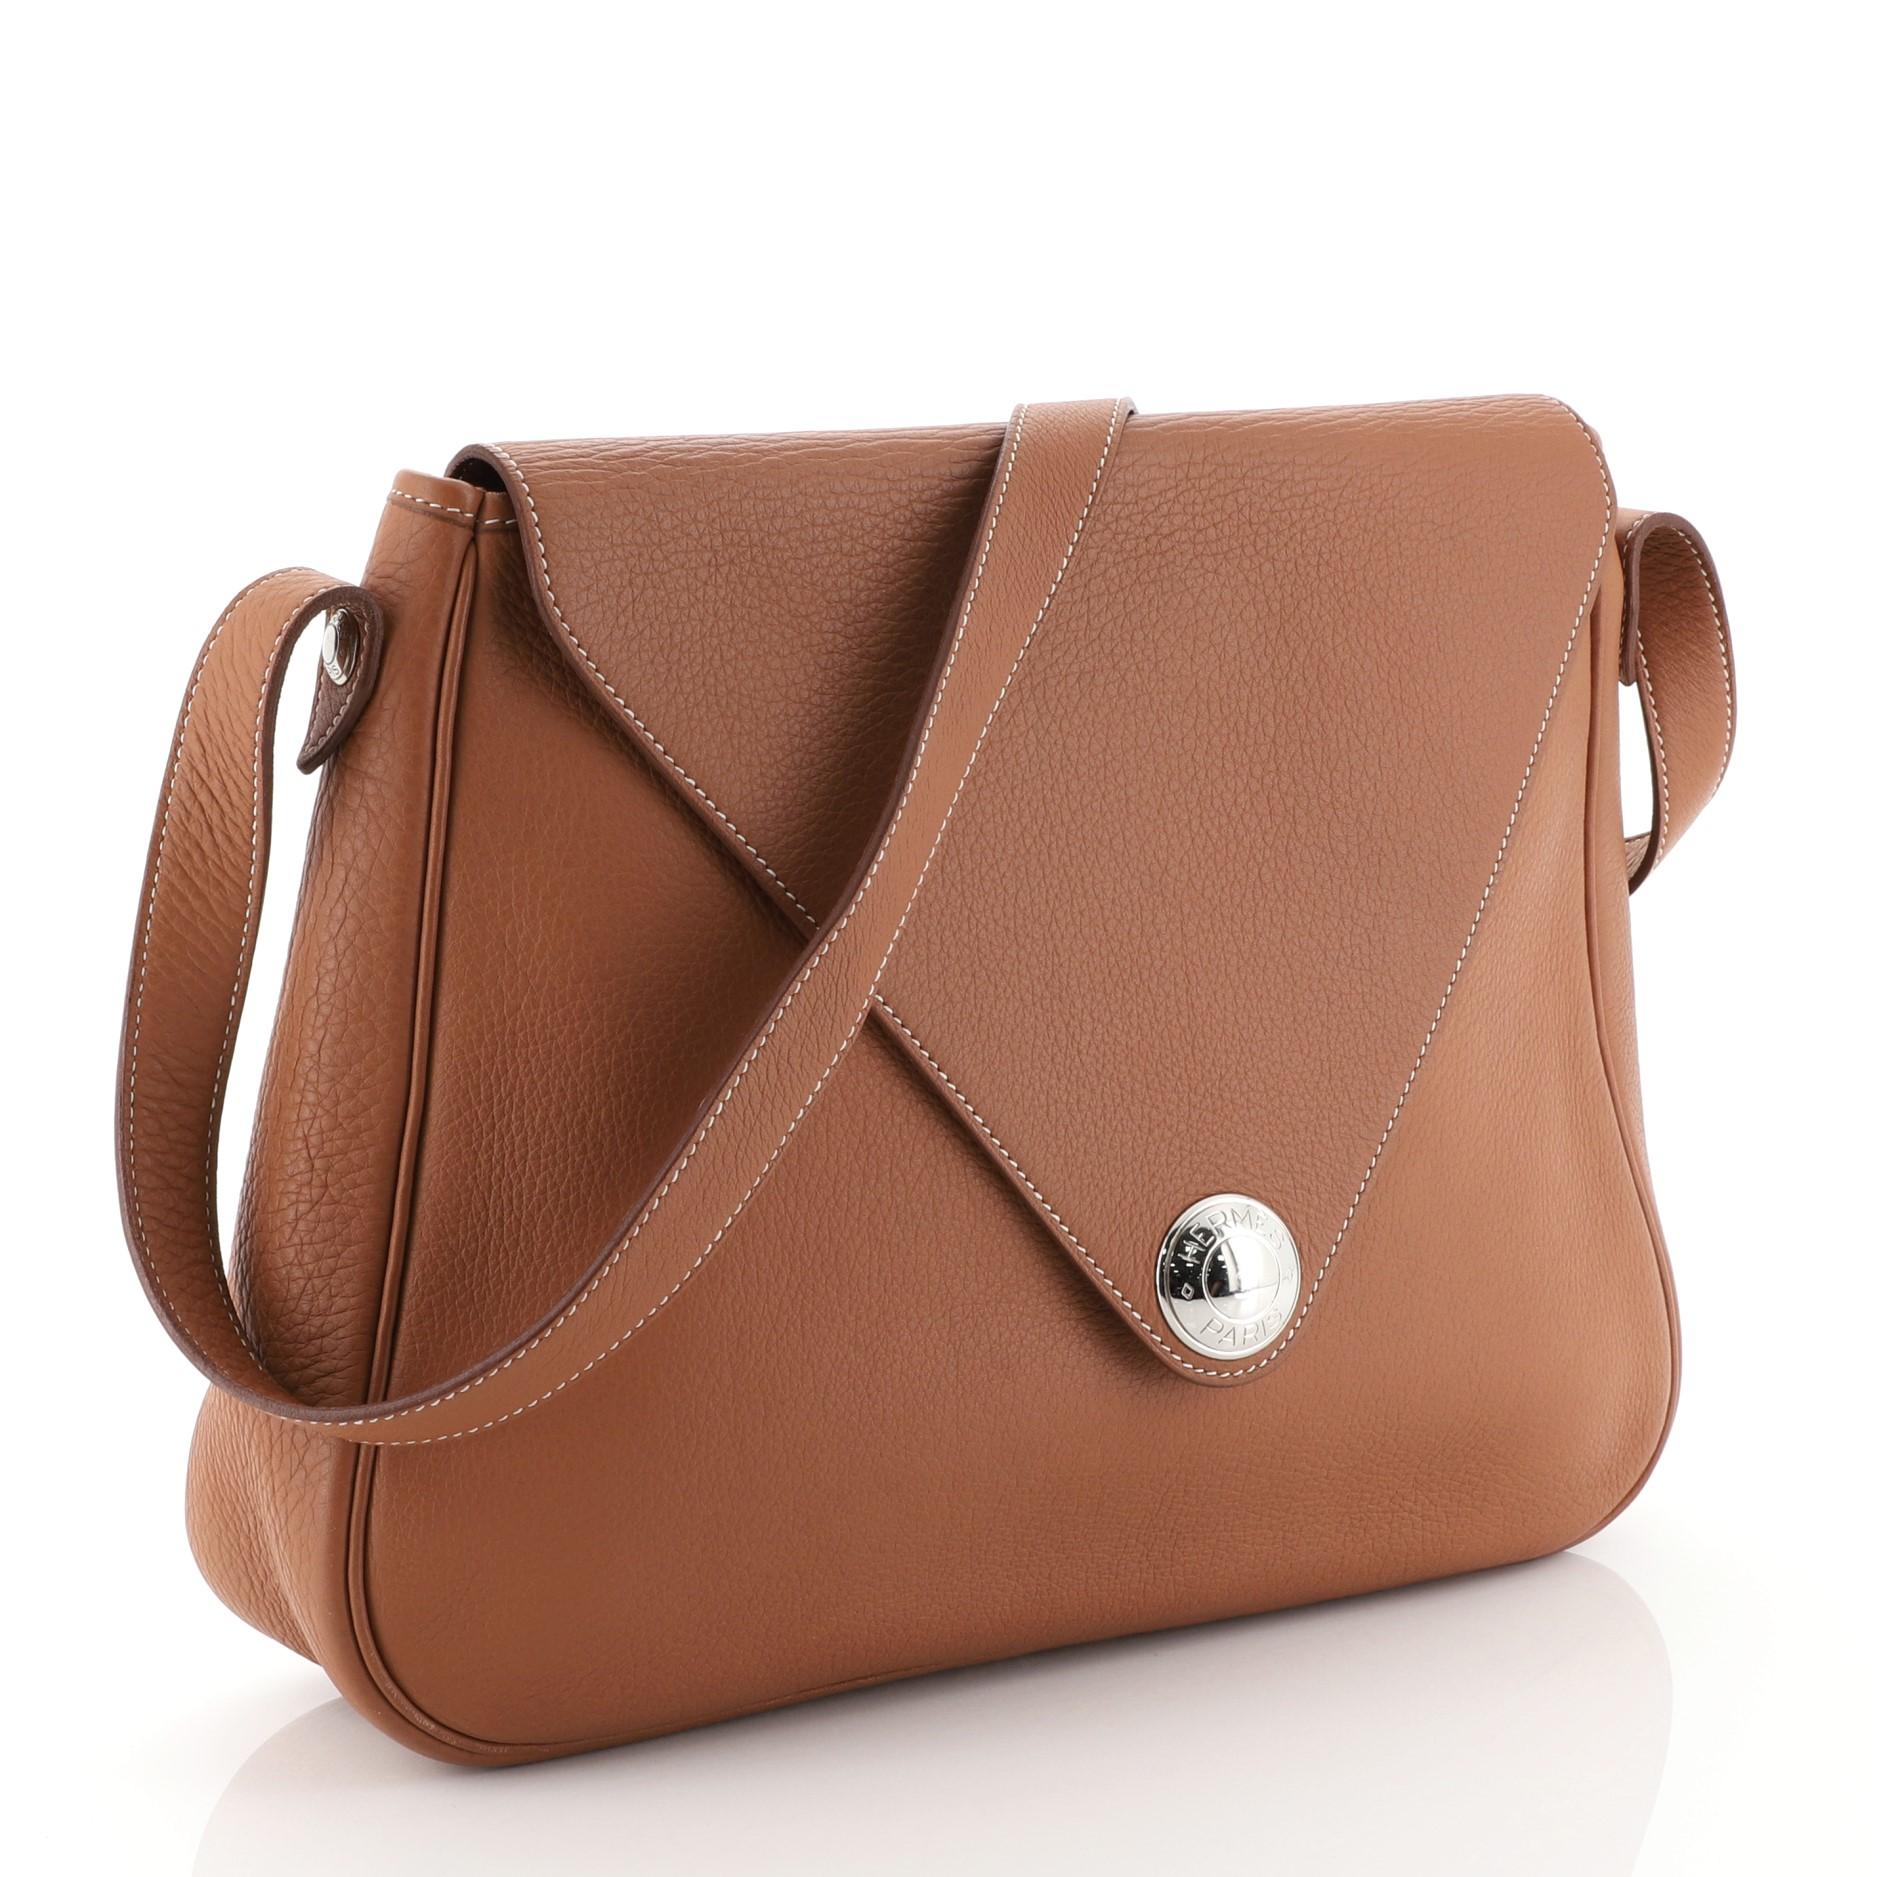 This Hermes Christine Handbag Leather, crafted in Etrusque brown Clemence leather, features single loop leather strap, envelope-style flap and palladium hardware. Its flap opens to an Etrusque brown Chevre leather interior with slip pocket. Date